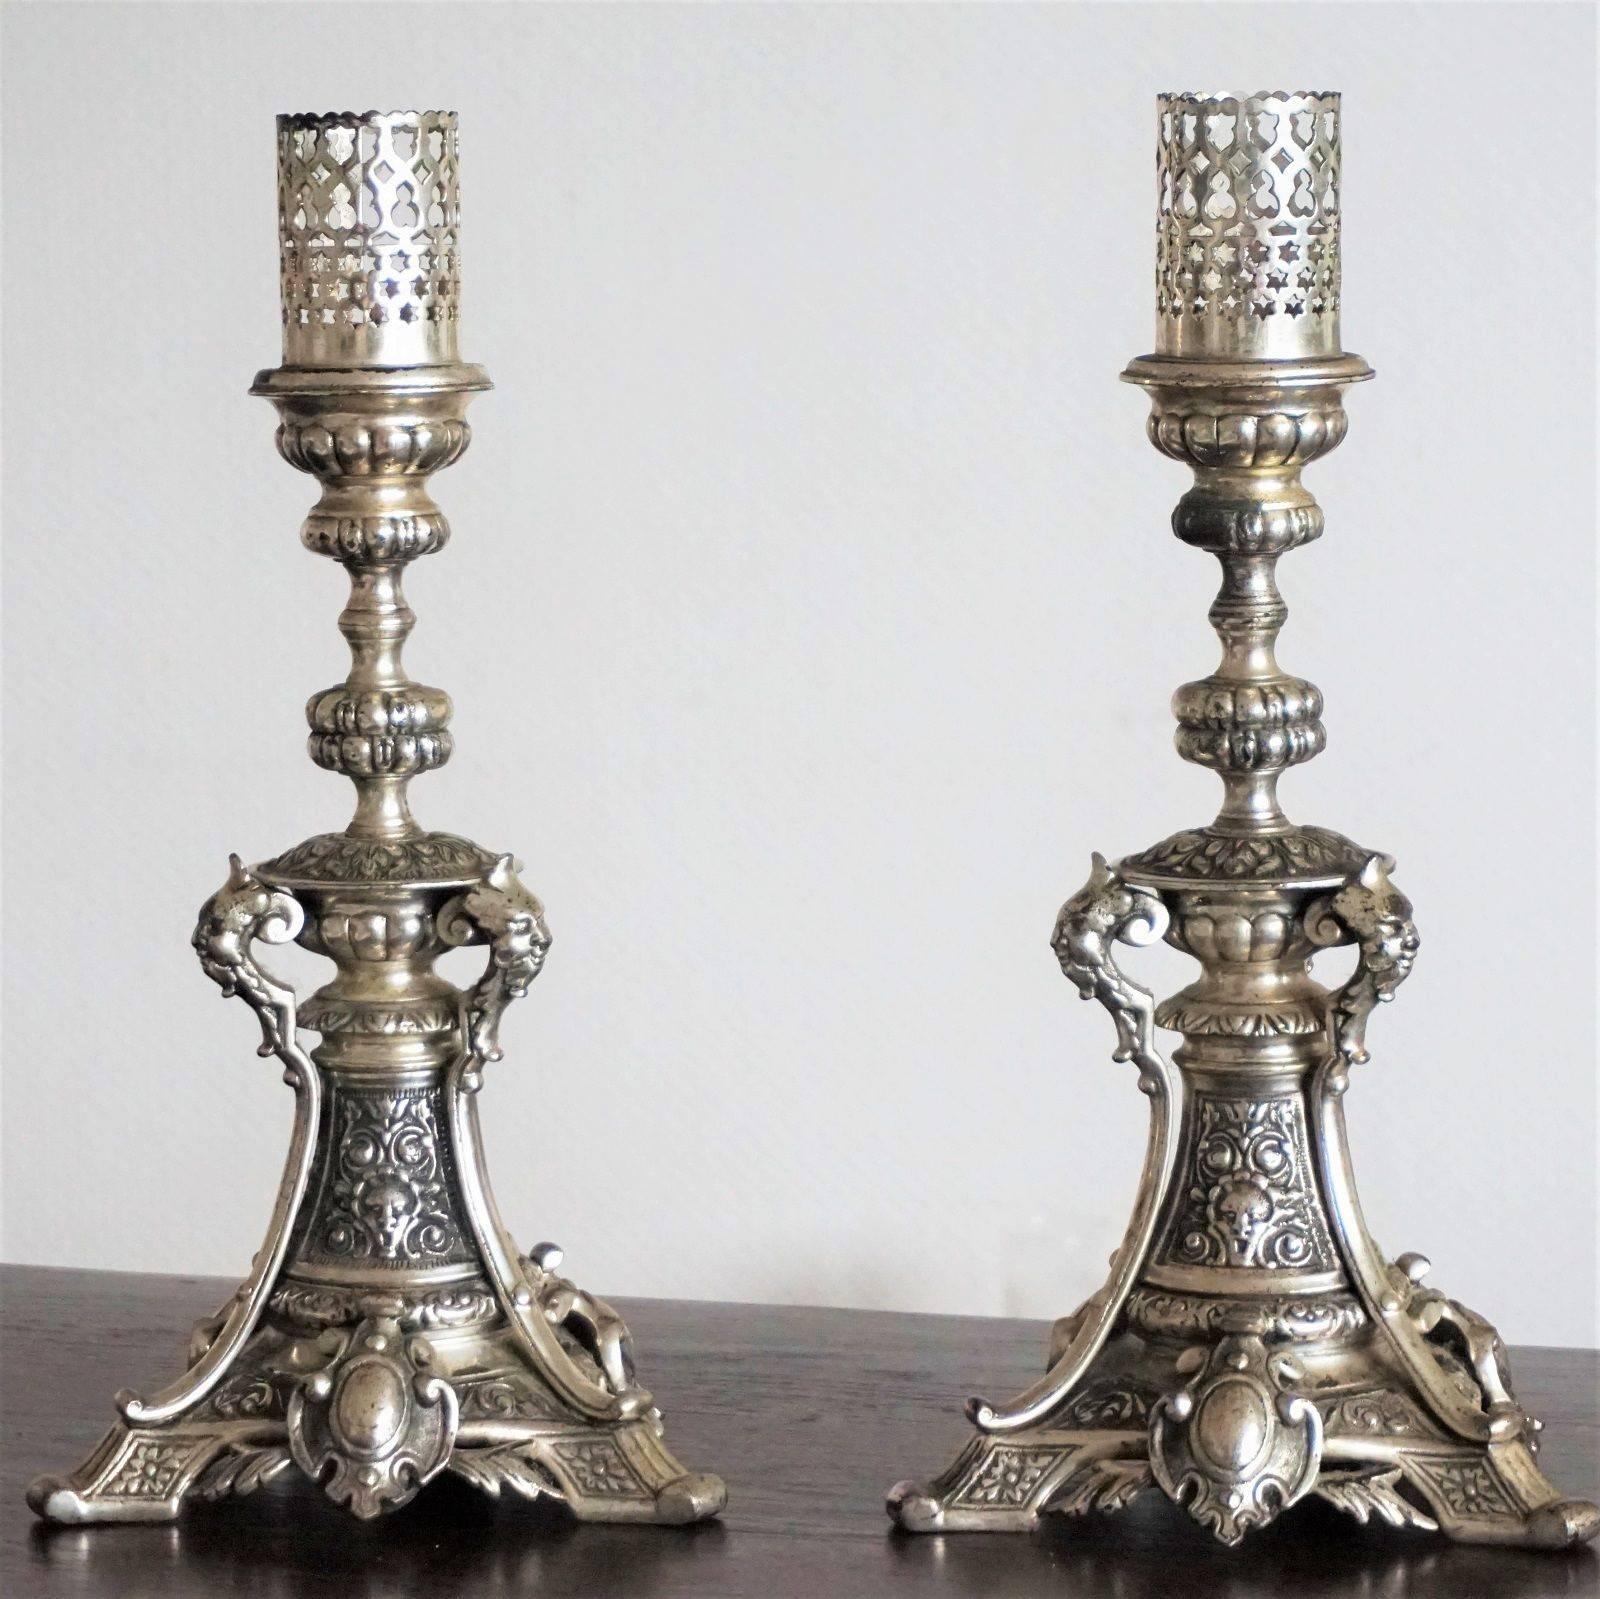 19th century pair of silver plated candle holders richly decorated with Gothic ornaments and three heads, with removal wax plate, circa 1870
Measures:
Height 12.80 in (32.5 cm).
Width/Depth 6.30 in (16 cm)

Weight: 3.8 lbs each candlestick (1.900